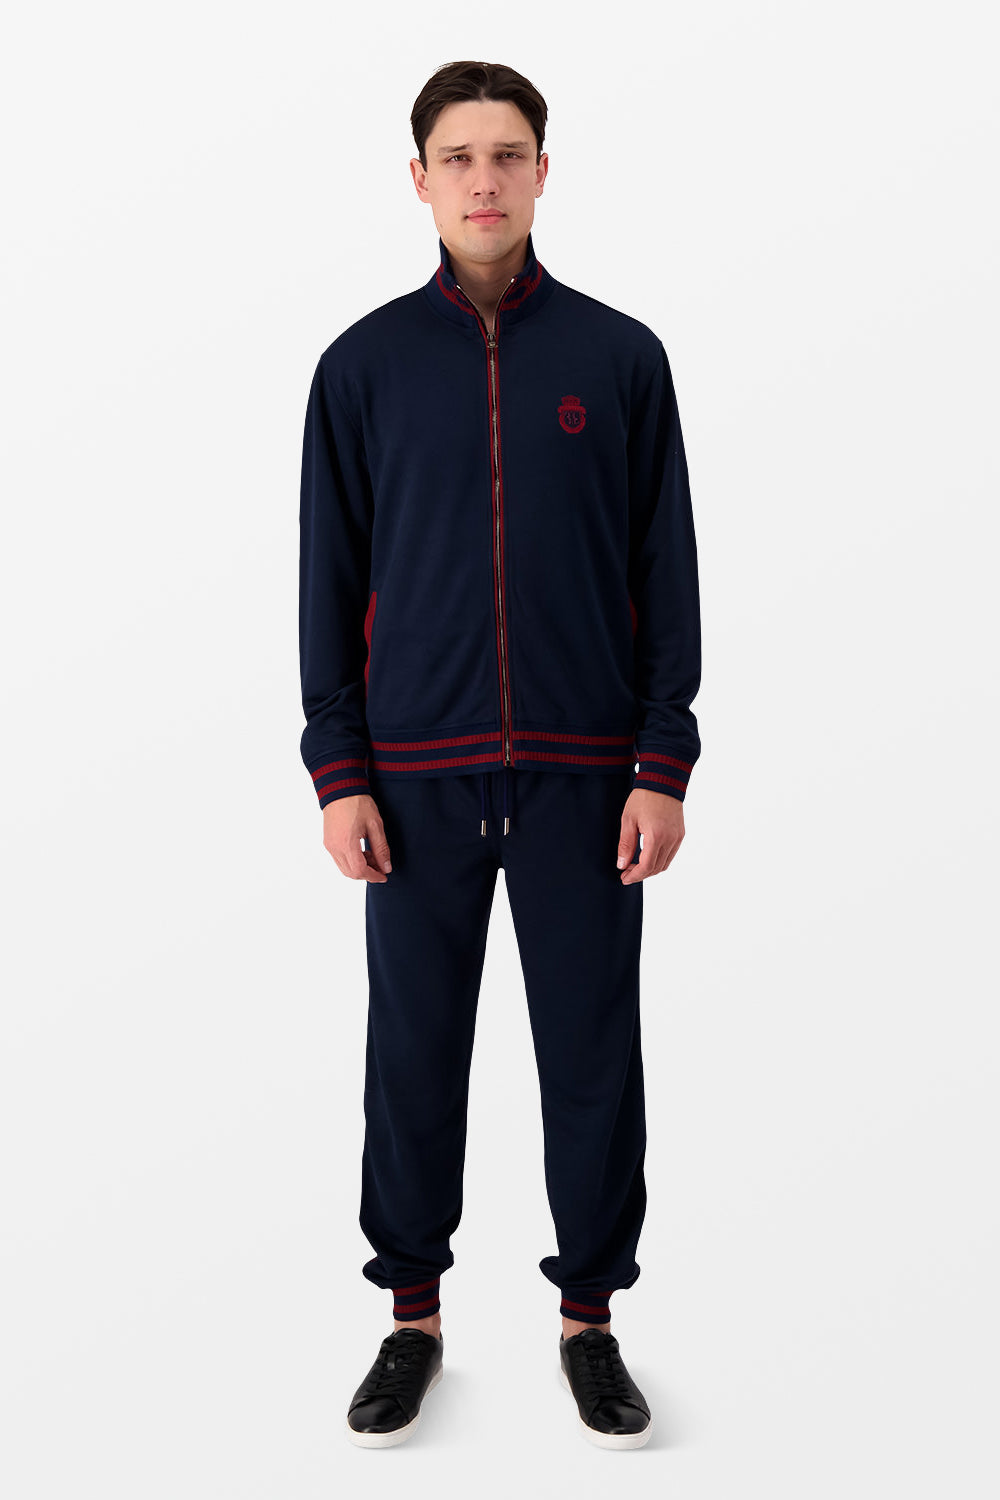 Shop Branded Luxury Men's Tracksuits From Top Designers